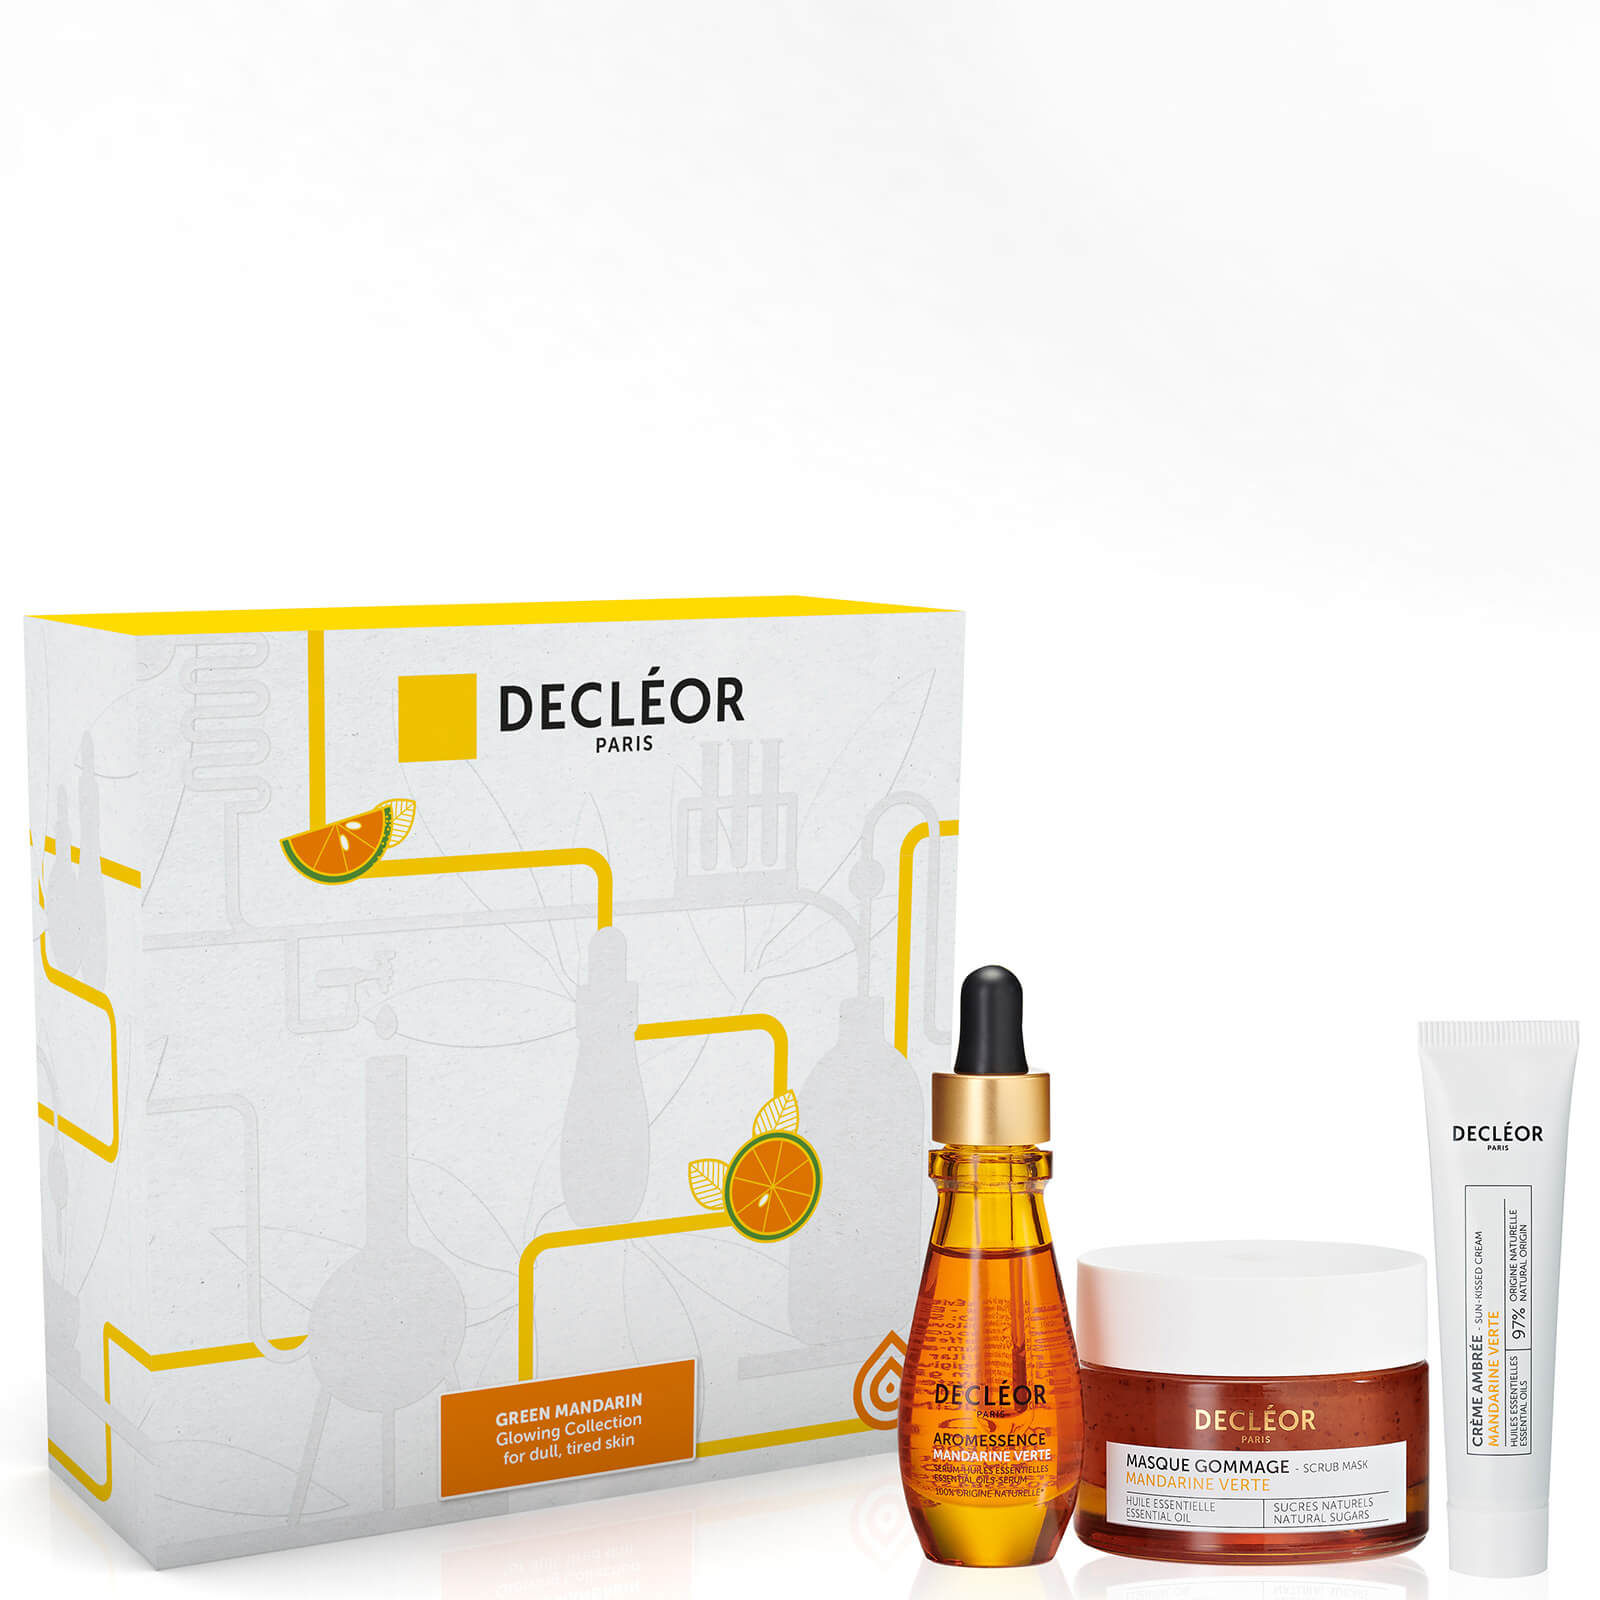 DECLÉOR Green Mandarin Glowing Collection for Dull/Tired Skin